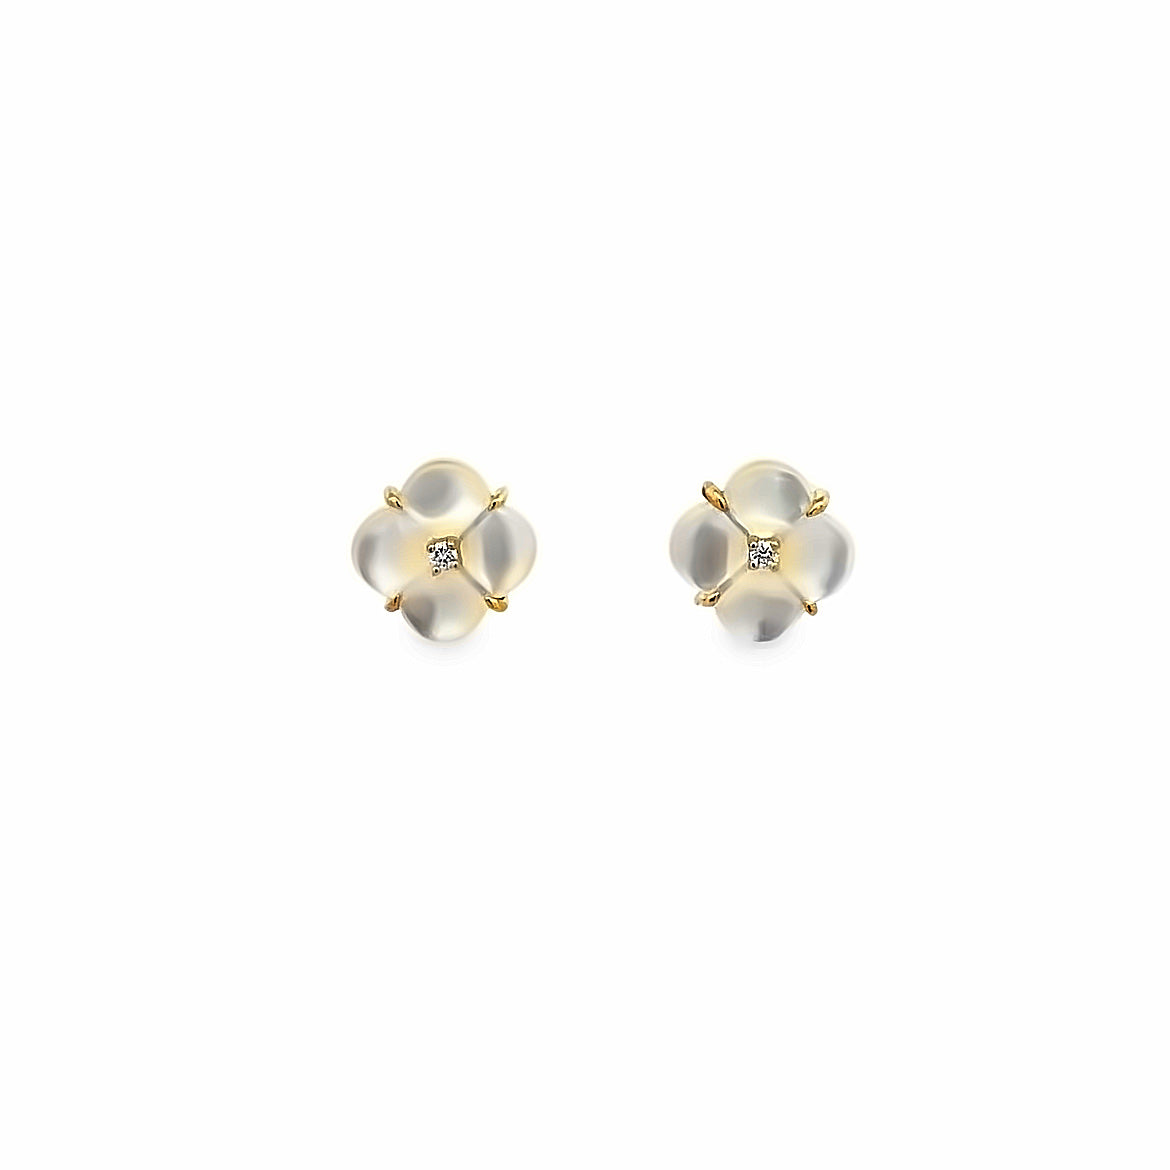 18K GOLD FLOWER SMALL EARRINGS WITH MOTHER OF PEARL